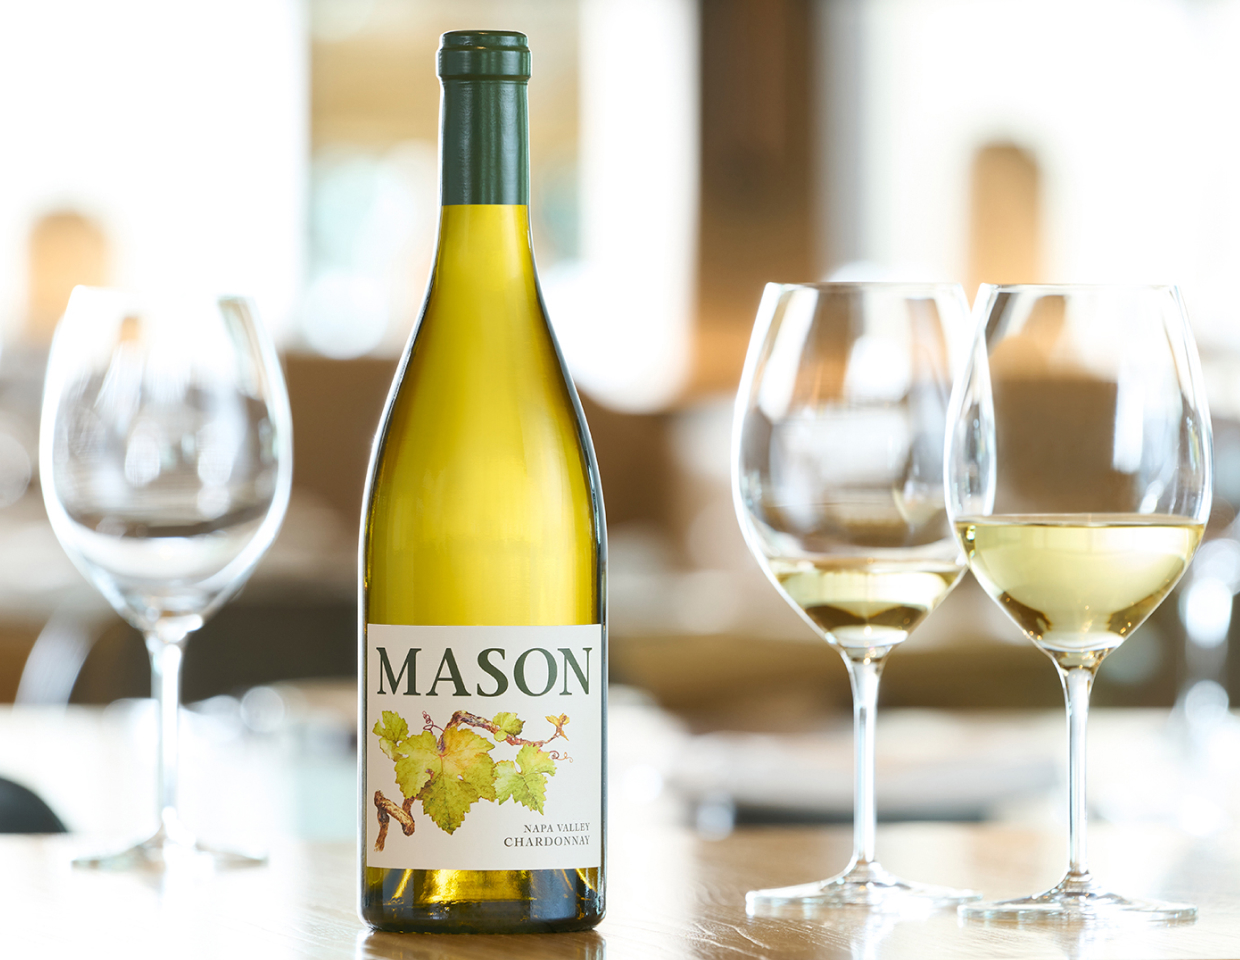 Bottle and glasses of Mason chardonnay and glasses of wine on a wood table in a brightly lit room.